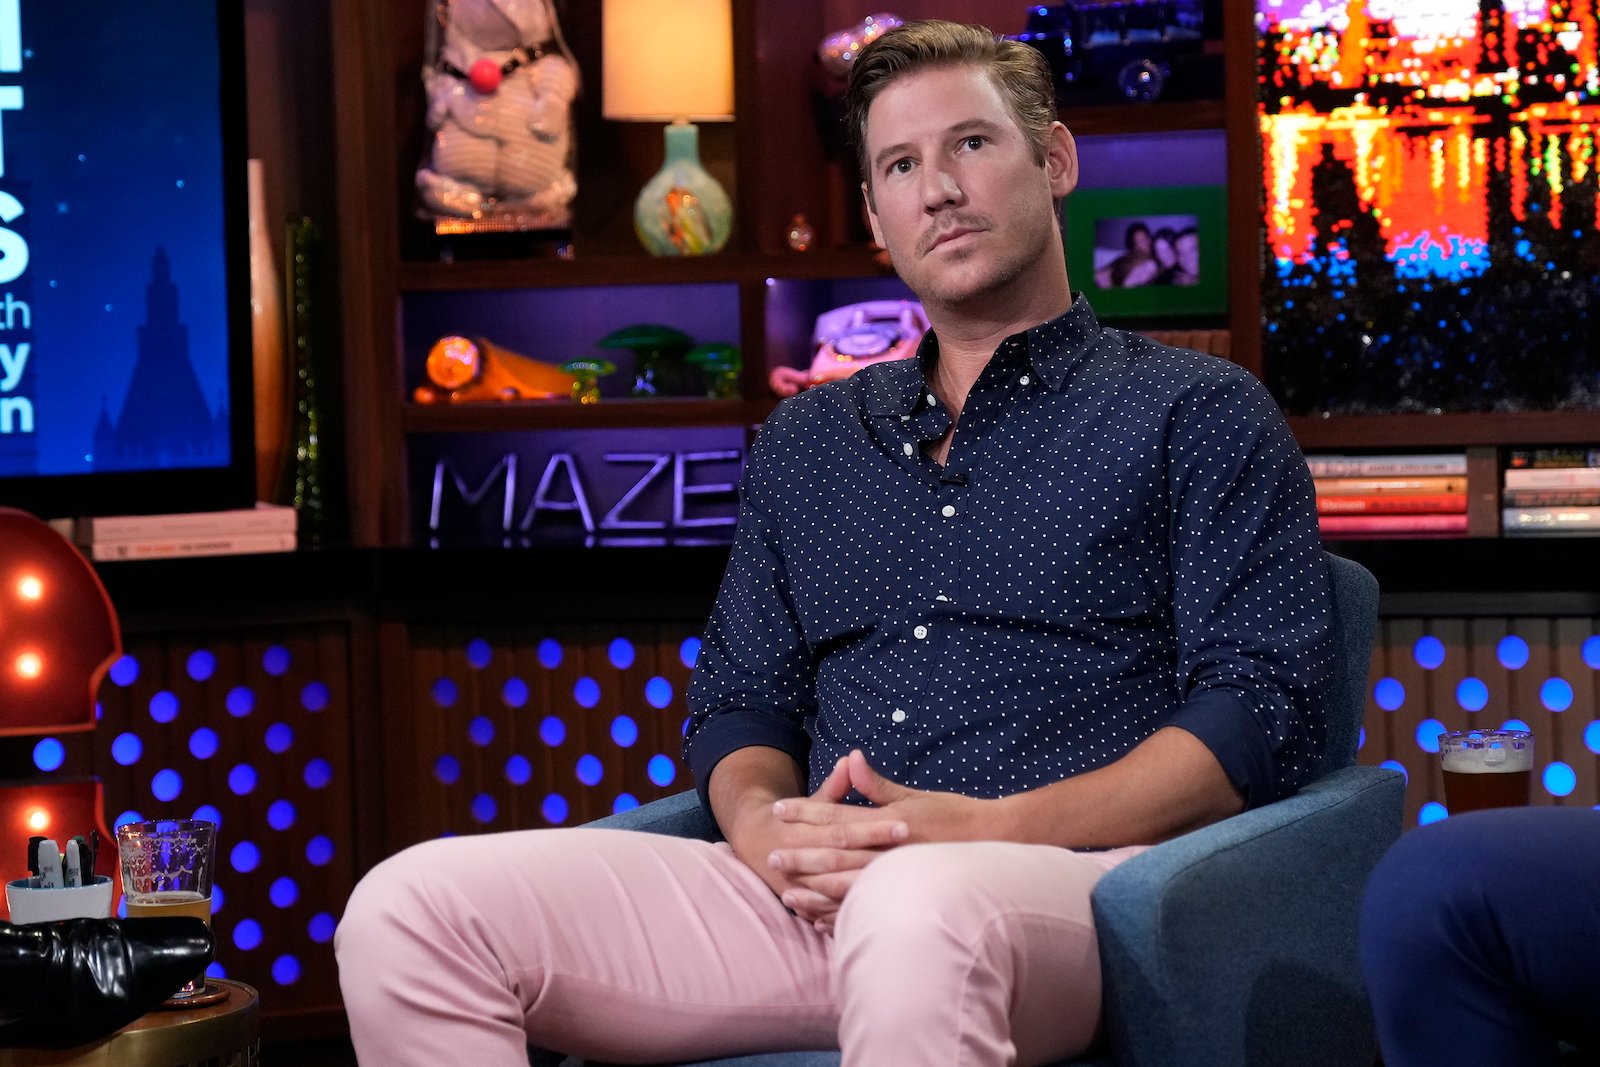 ‘Southern Charm’: Austen Kroll Shares Why He Wasn’t Going to Respond to a Recent Social Media Attack